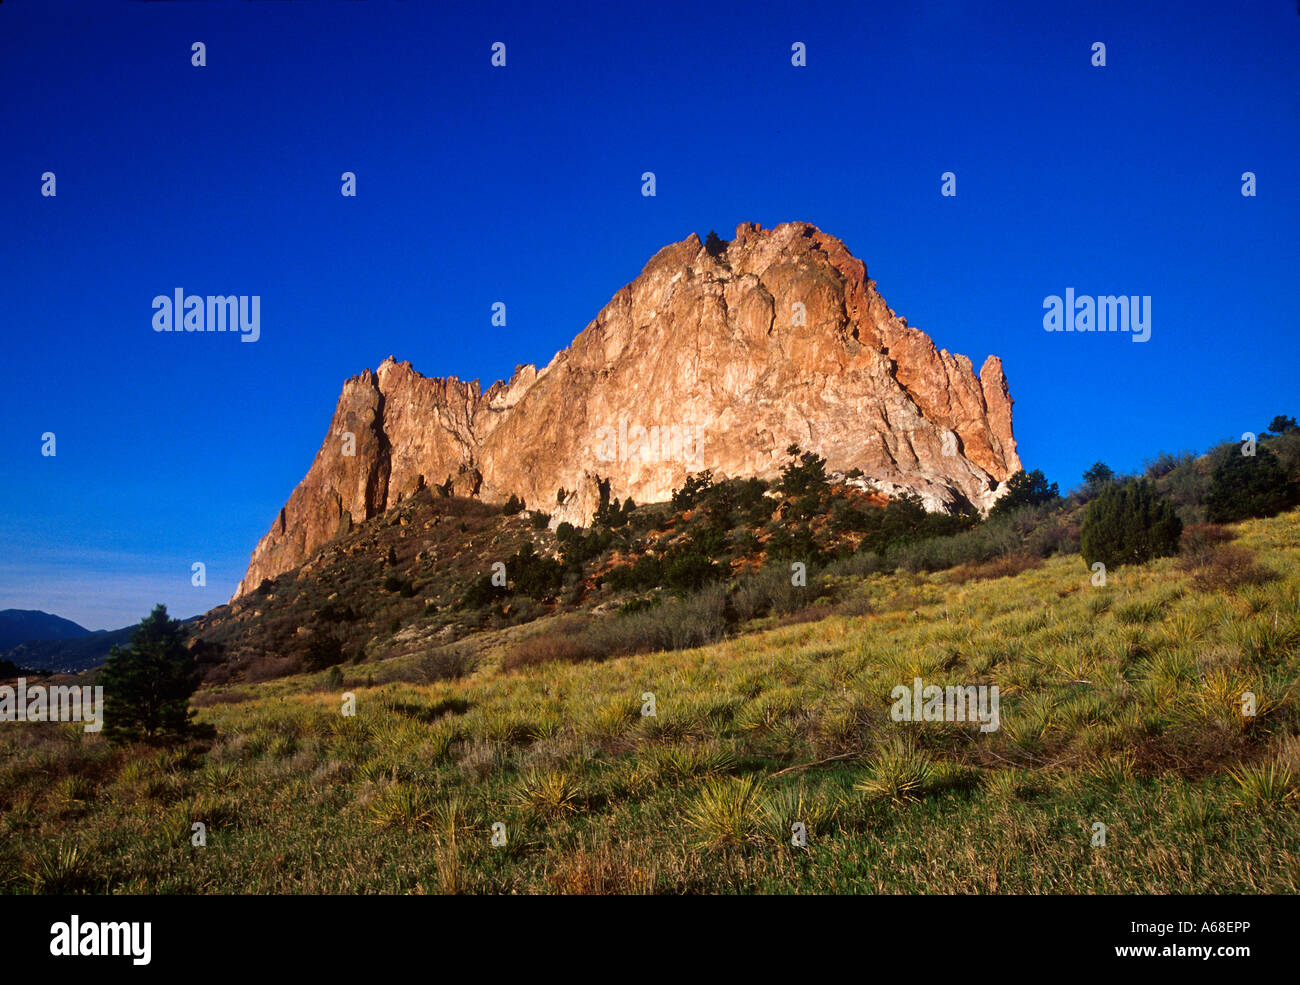 Sedimentary rock formation in the Garden of the Gods Park, Colorado Stock Photo